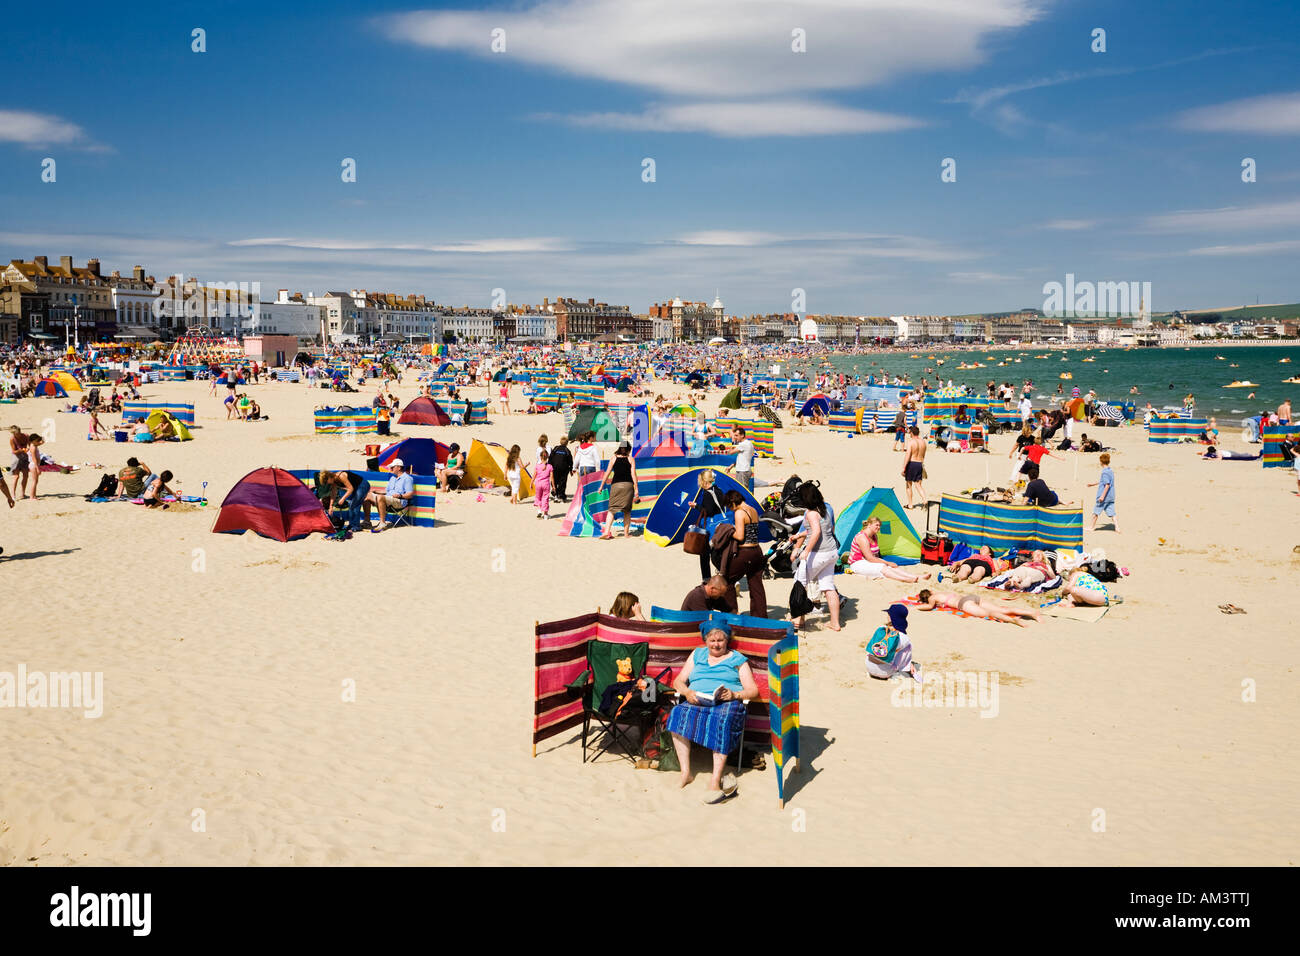 People on the crowded busy seaside beach on a hot summer day, Weymouth beach, Dorset, England, UK Stock Photo